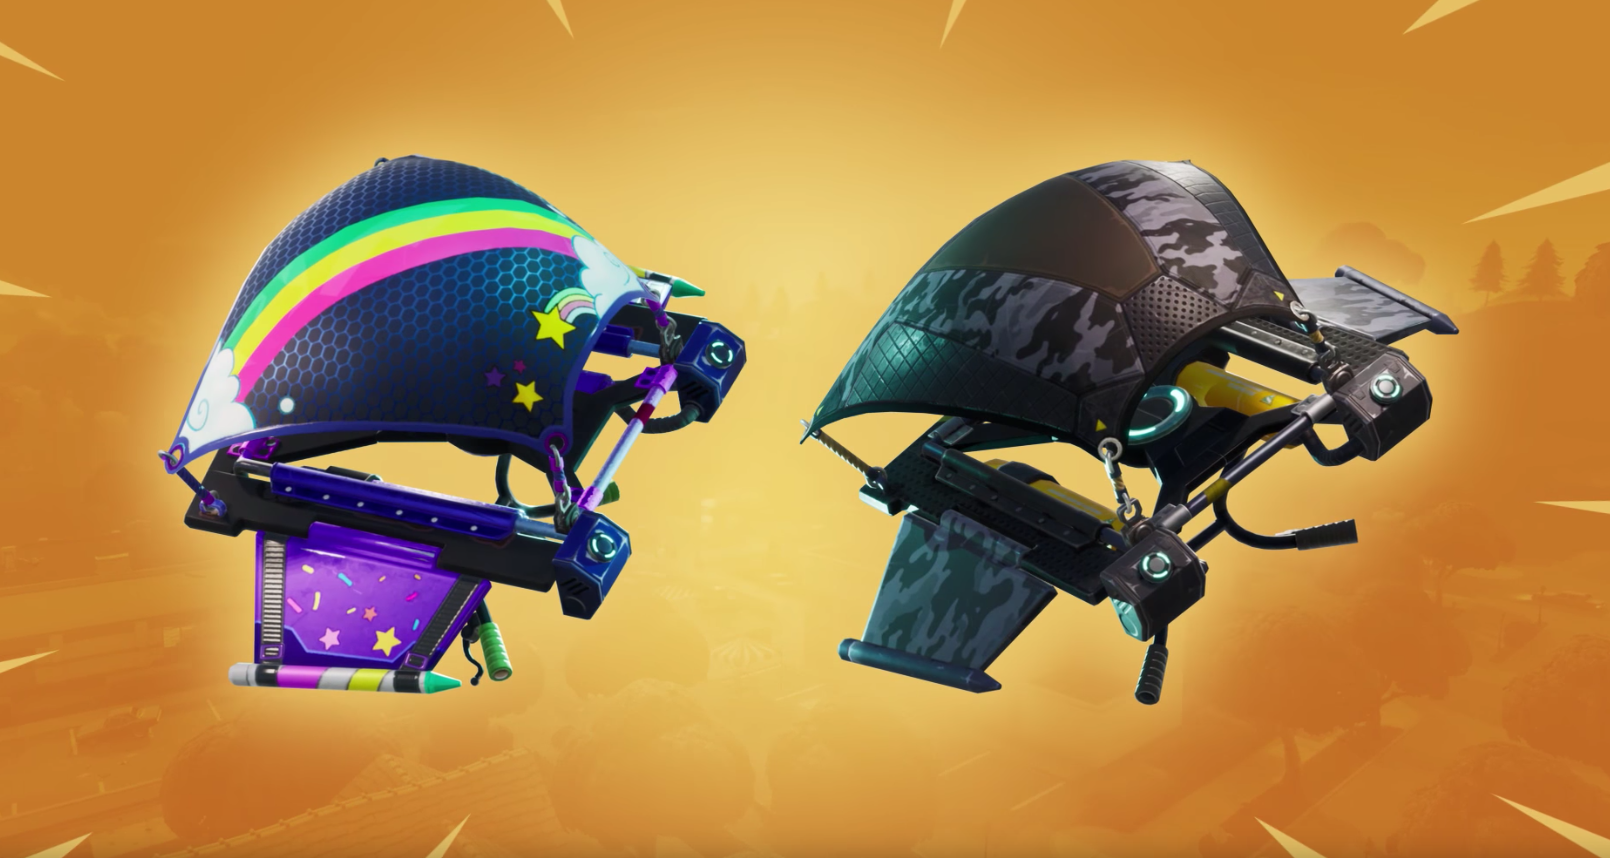 Fortnite Battle Royale's $10 Battle Pass Is Nice But Not ... - 1610 x 858 png 1381kB